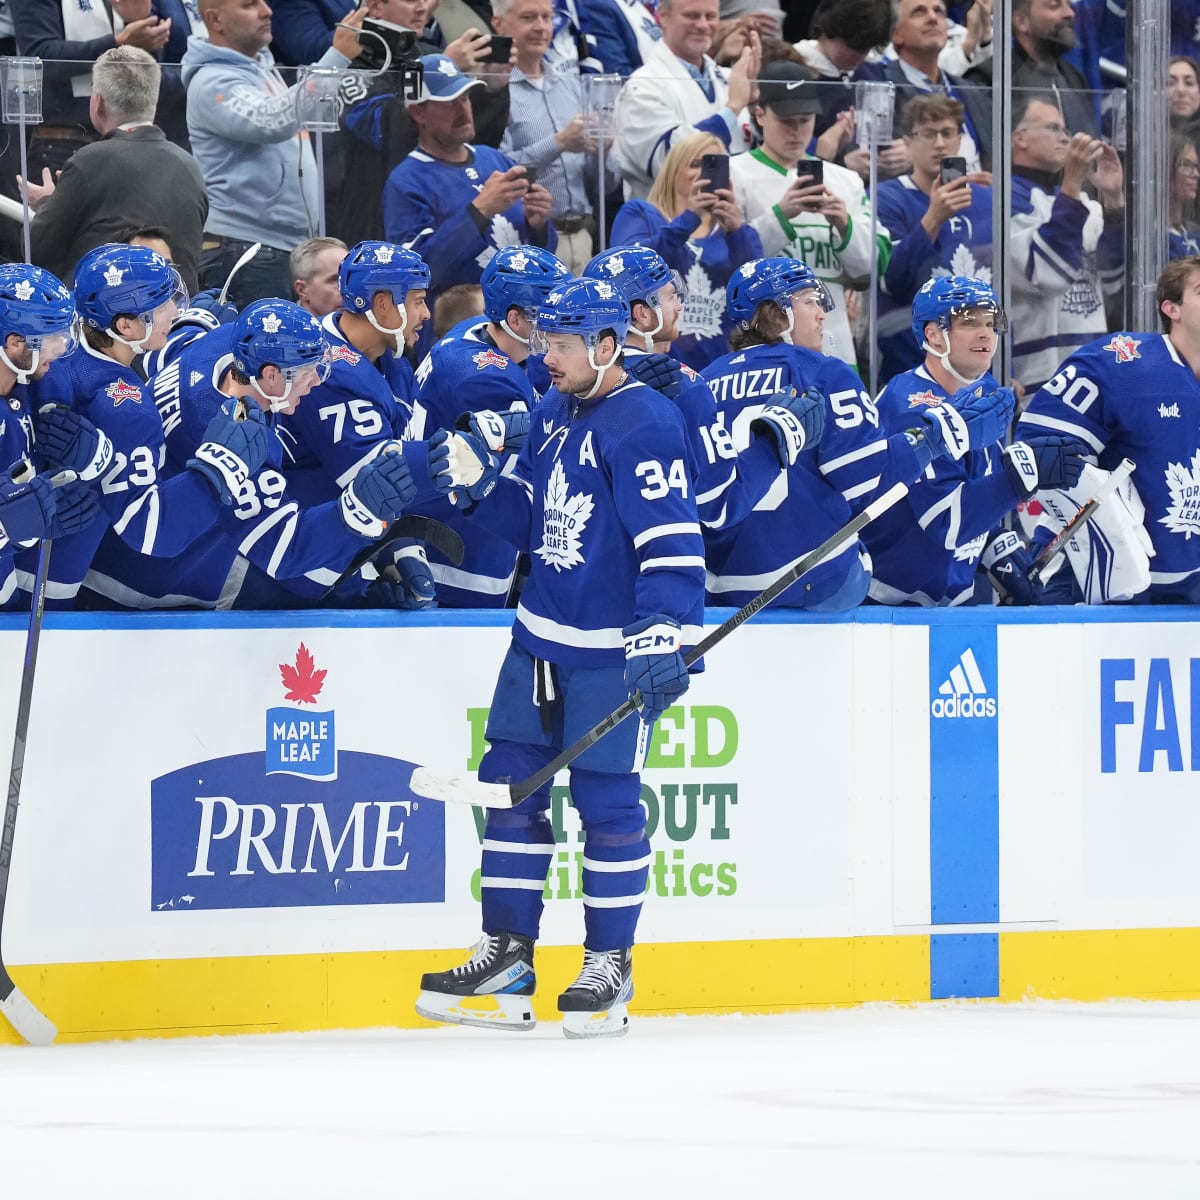 Game in 10: Auston Matthews breaks through with the game-winner, resilient Maple  Leafs overcome slow start to end road trip on a high note in New Jersey